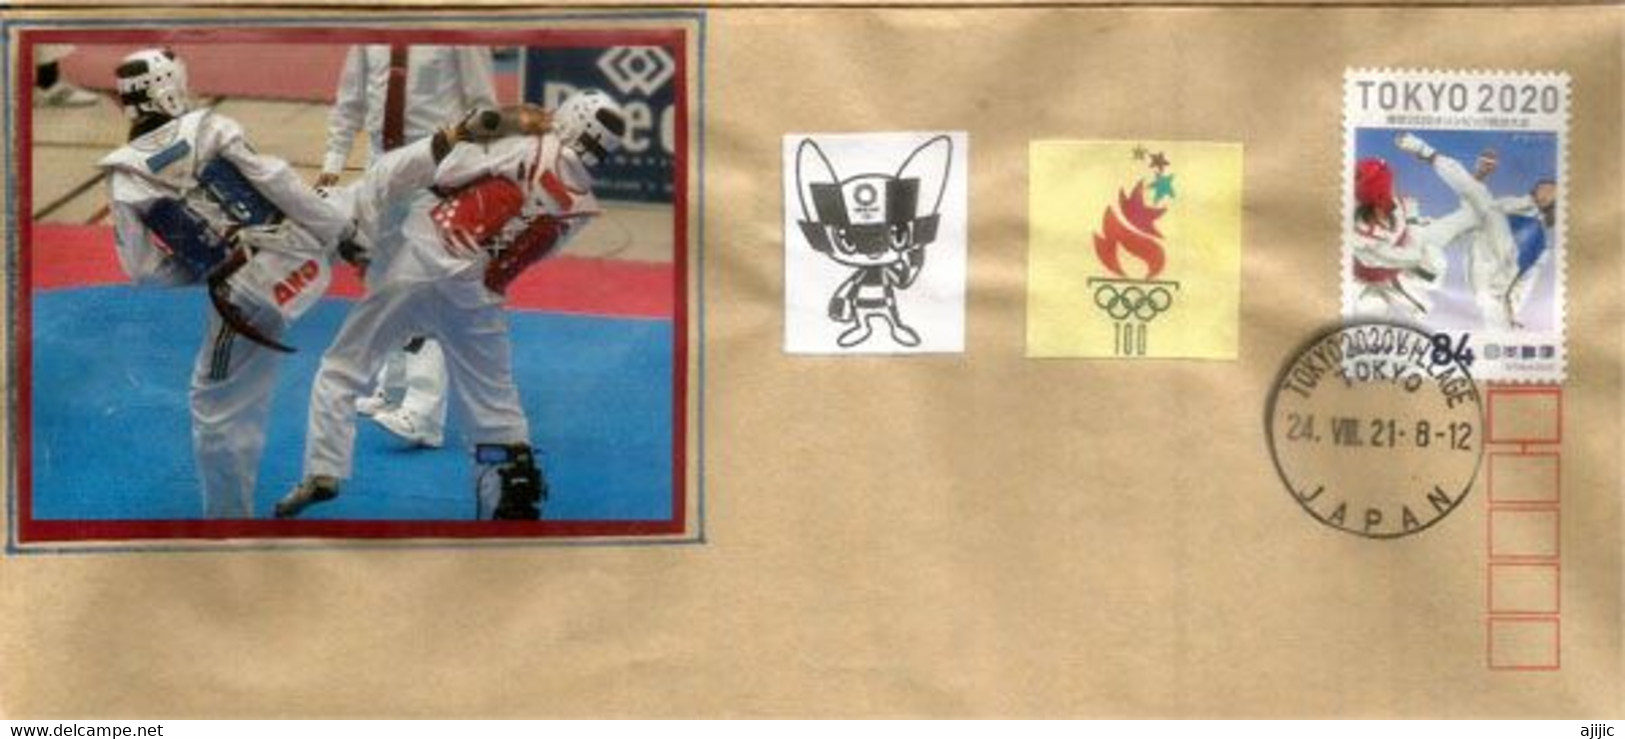 TAEKWONDO In TOKYO OLYMPICS 2020, (RARE-SCARCE LETTER FROM TOKYO OLYMPIC VILLAGE POST-OFFICE) - Eté 2020 : Tokyo